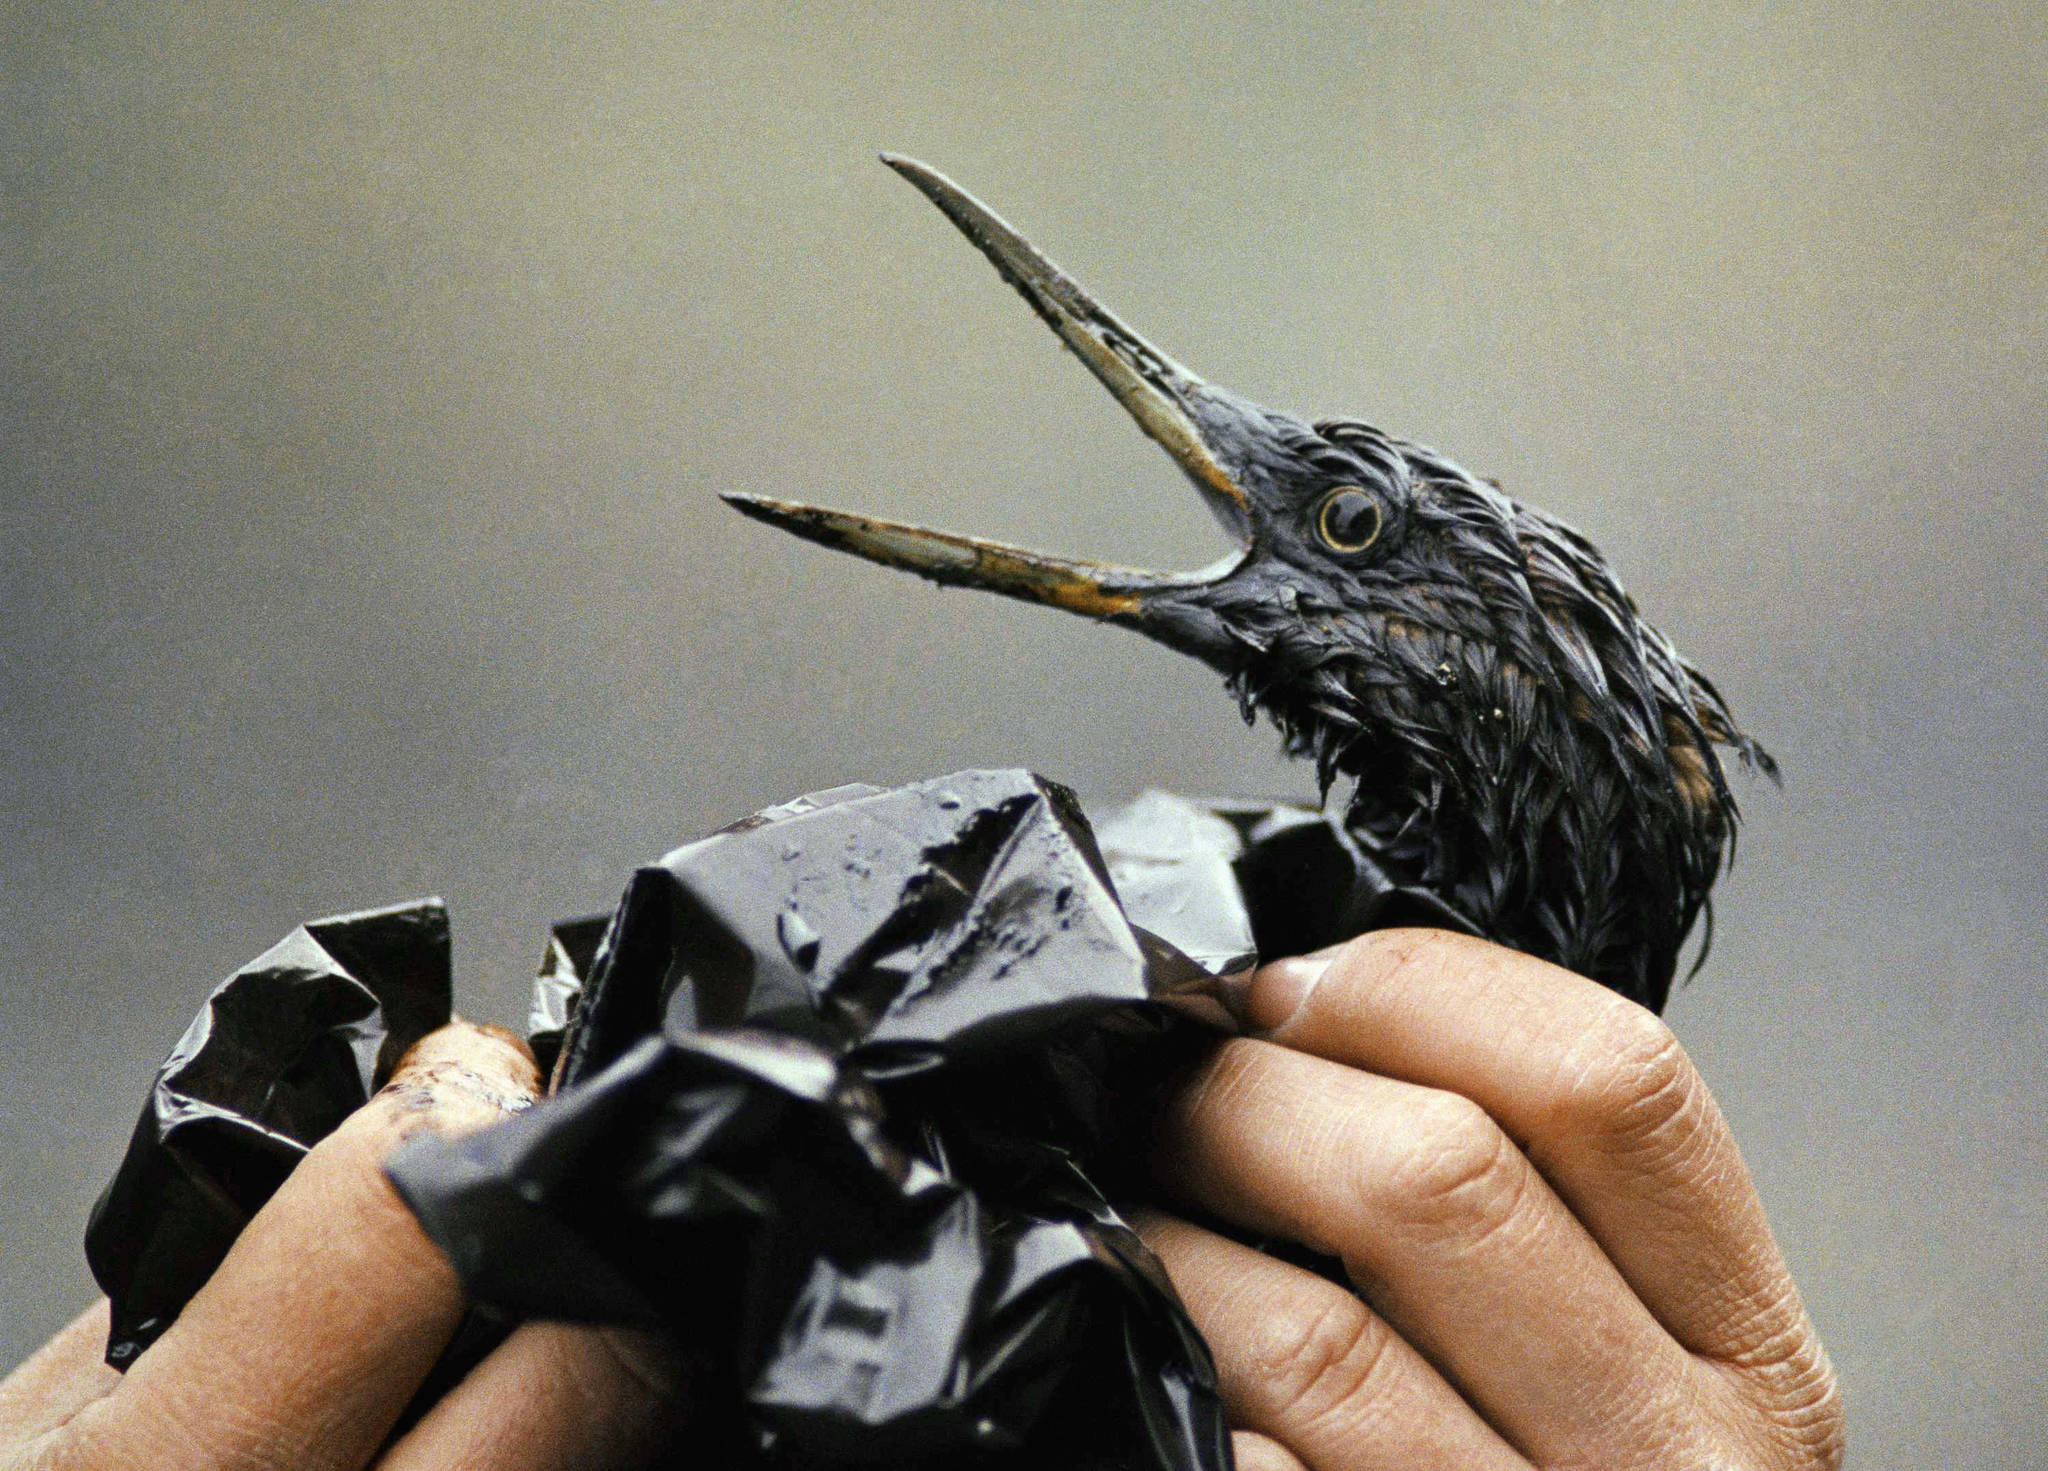 In this April 1989, file photo, an oil covered bird is examined on an island in Prince William Sound, Alaska, after the Exxon Valdez spill. Thirty years after the supertanker Exxon Valdez hit a reef and spilled about 11 million gallons of oil in Prince William Sound, the state of Alaska is looking whether to change its requirements for oil spill prevention and response plans, a move that one conservationist says could lead to a watering down of environmental regulations. (AP Photo/Jack Smith, File)